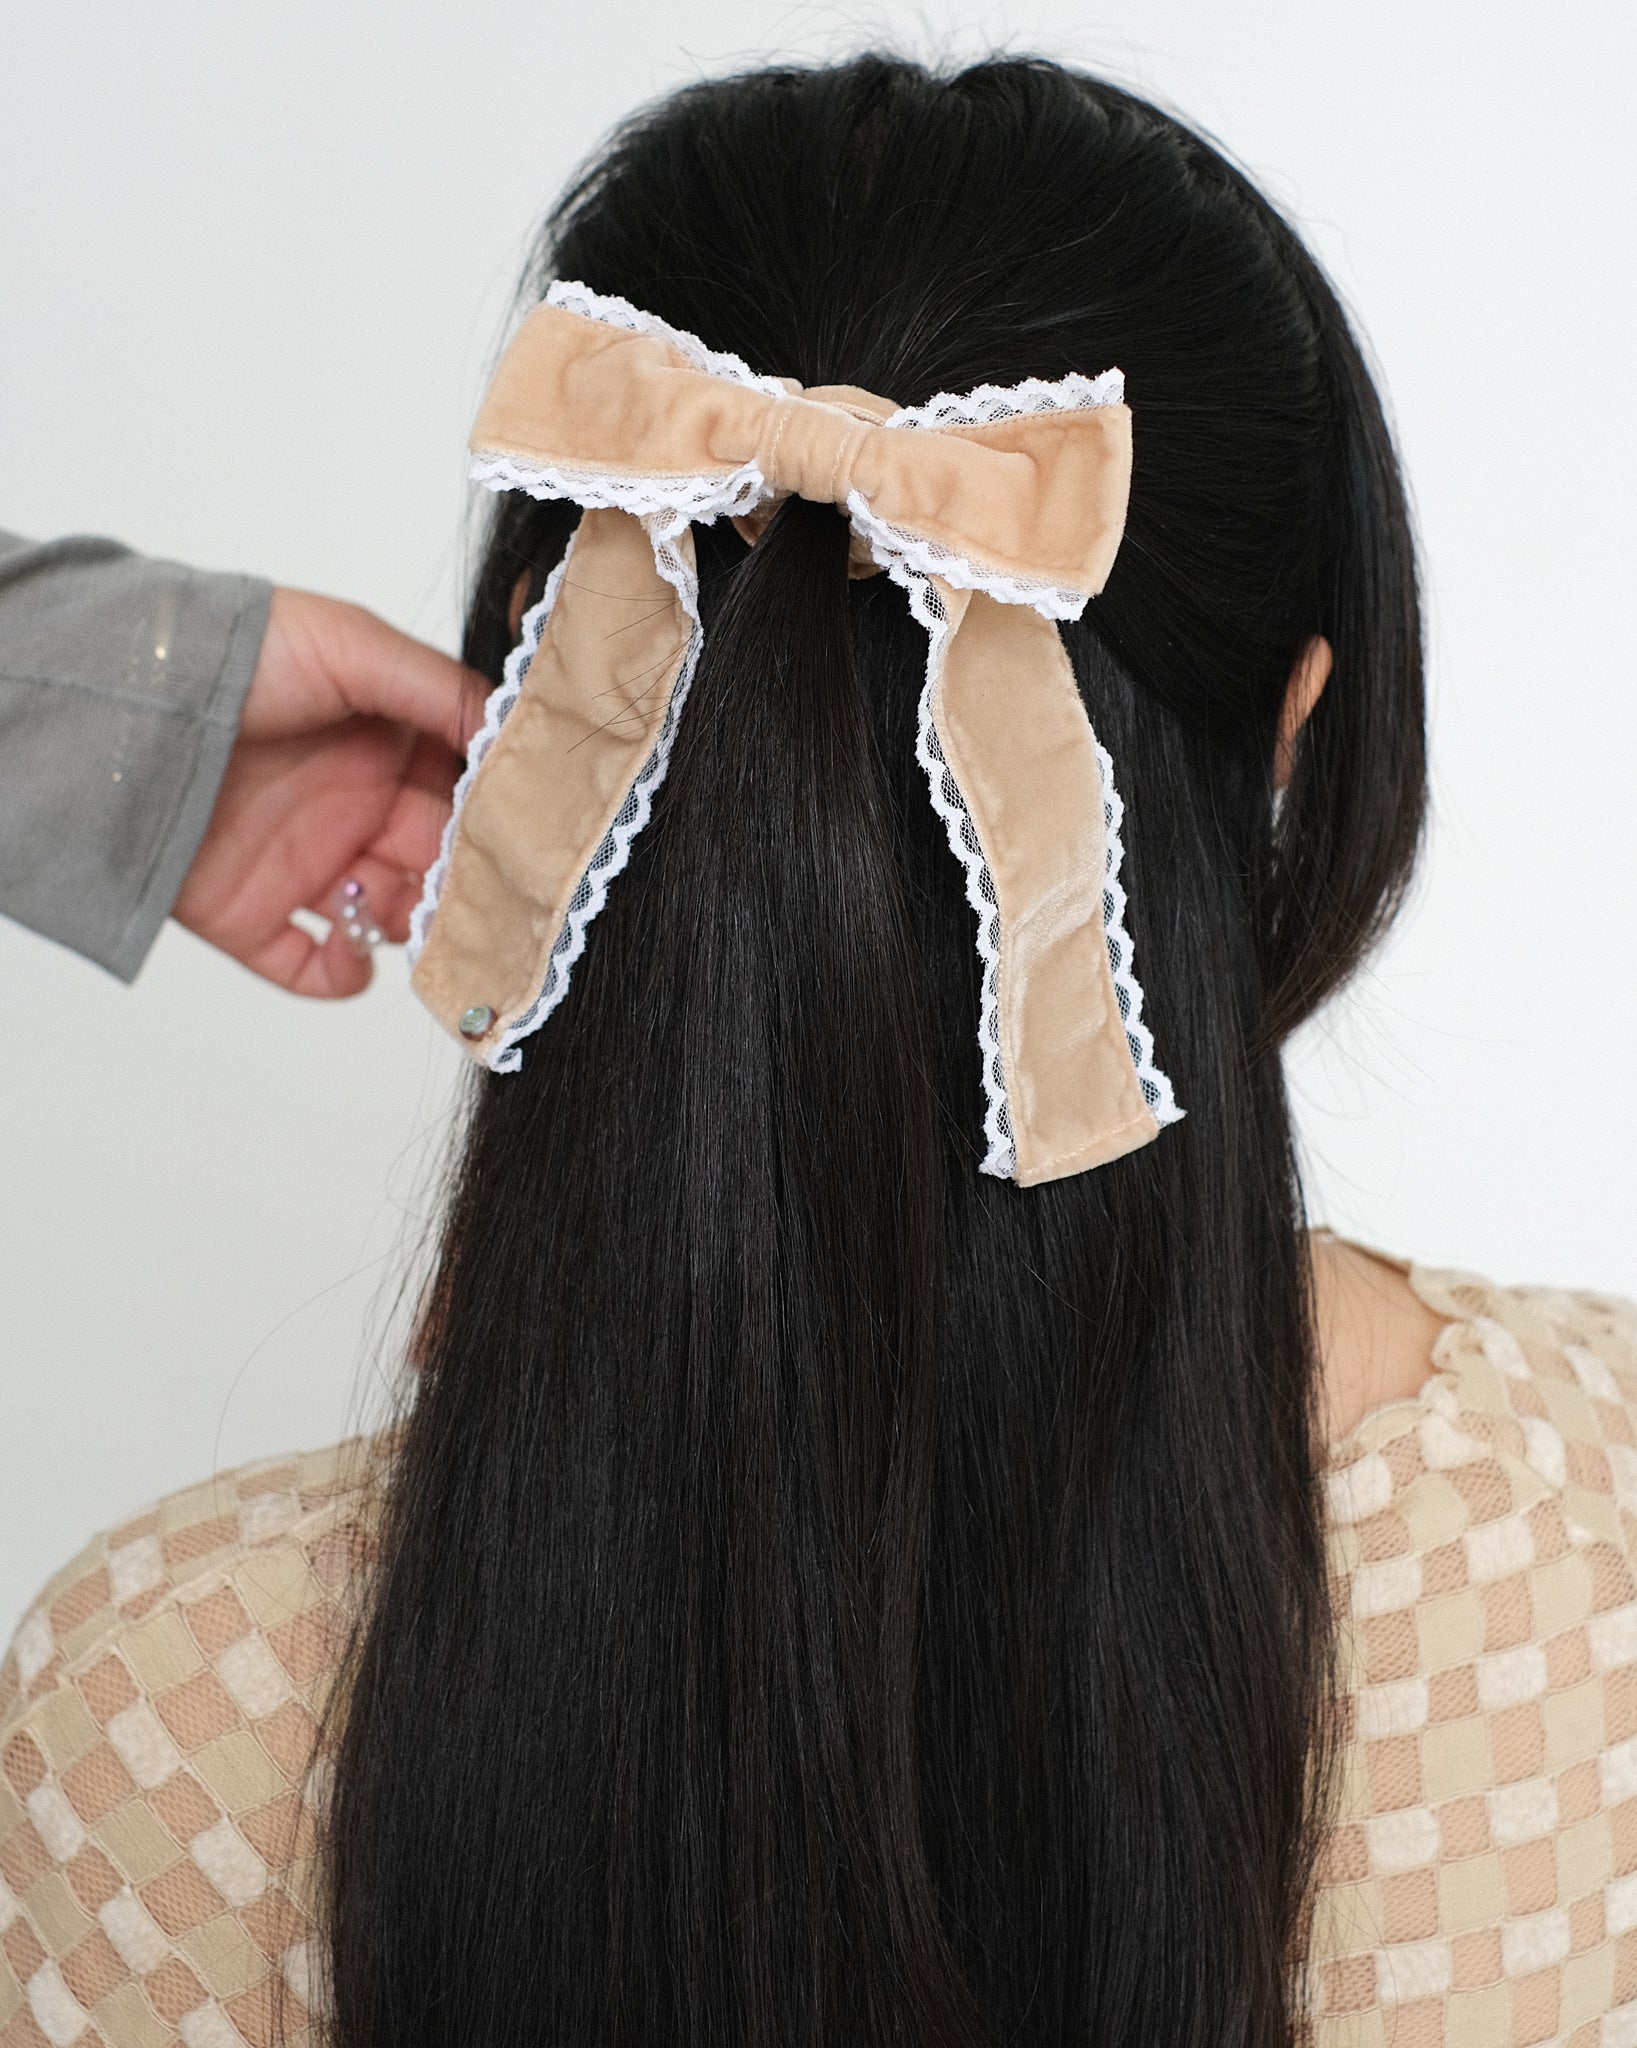 Merrma velvet bow scrunchie with lace trim in sand and white